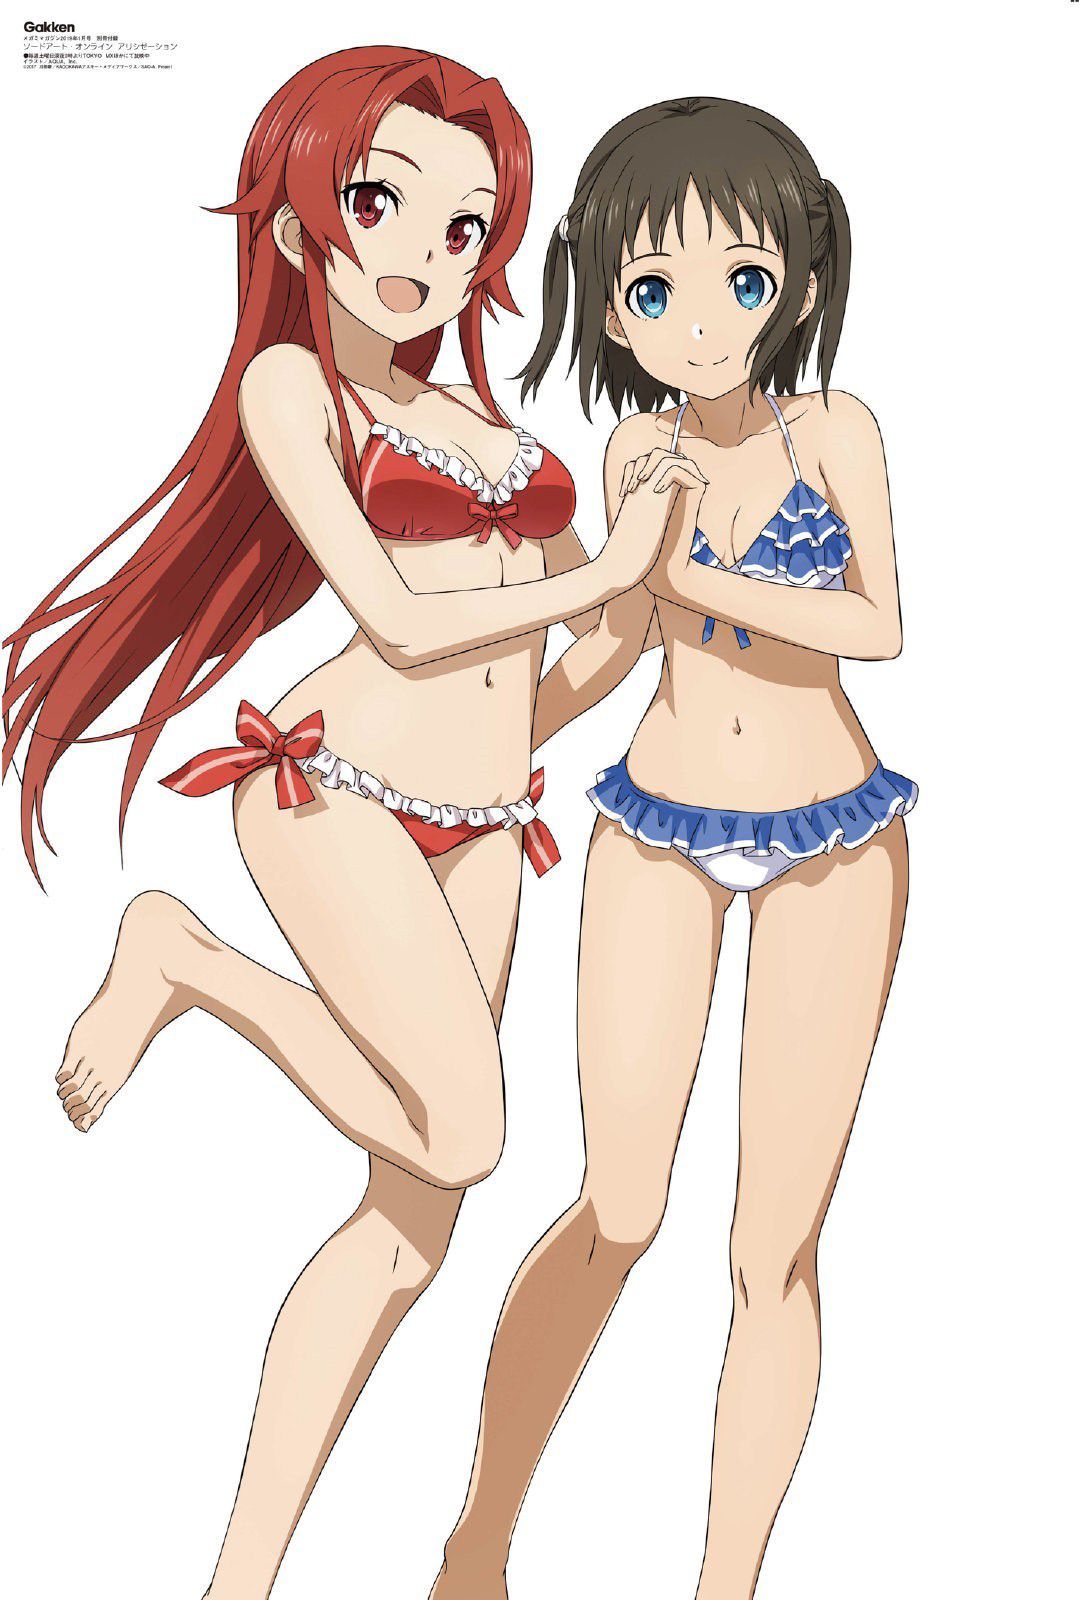 [Sword Art Online (SAO)] No. 50 erotic images such as Kana-chan and straight Leaf Chan tomorrow 1